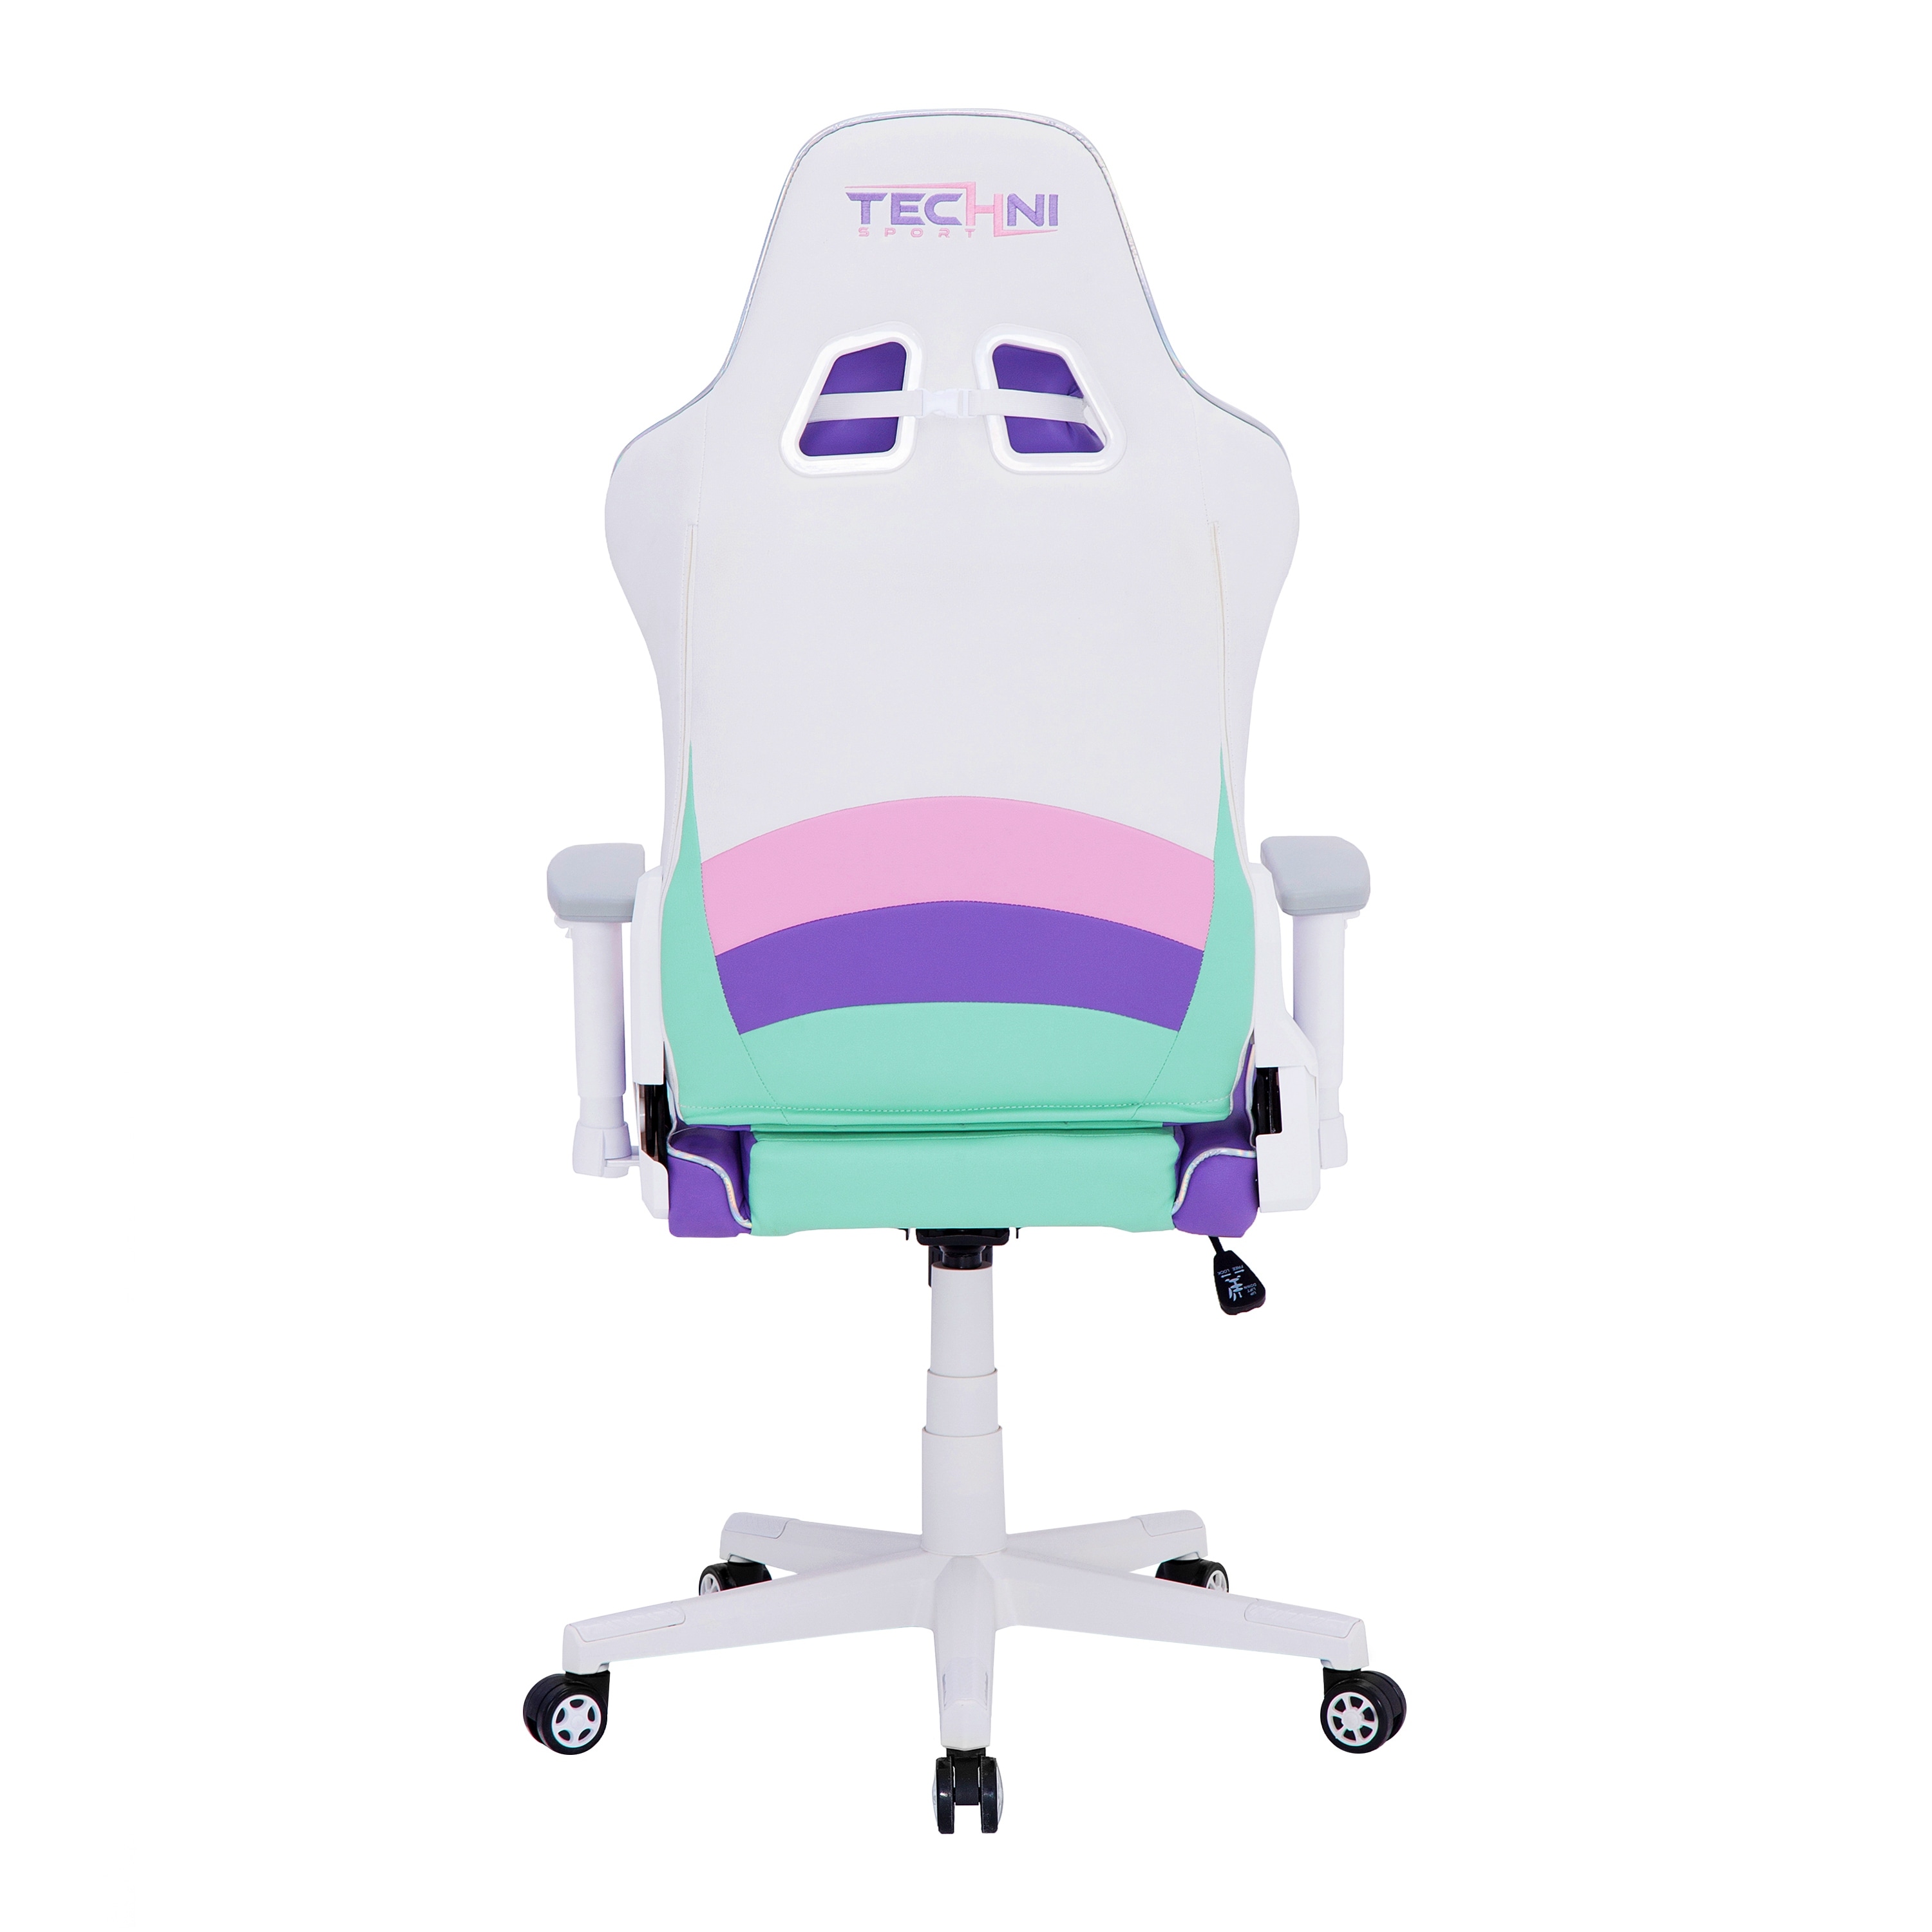 https://ak1.ostkcdn.com/images/products/is/images/direct/6be9d33aeec7cc1d08a0671f6c157e806878e16c/Leather-PC-Gaming-Chair-Adjustable-Neck-Pillow-and-Heart-Shaped-Lumbar-Support-Cushion-Office-Chair-with-Nylon-Base-%26-Casters.jpg